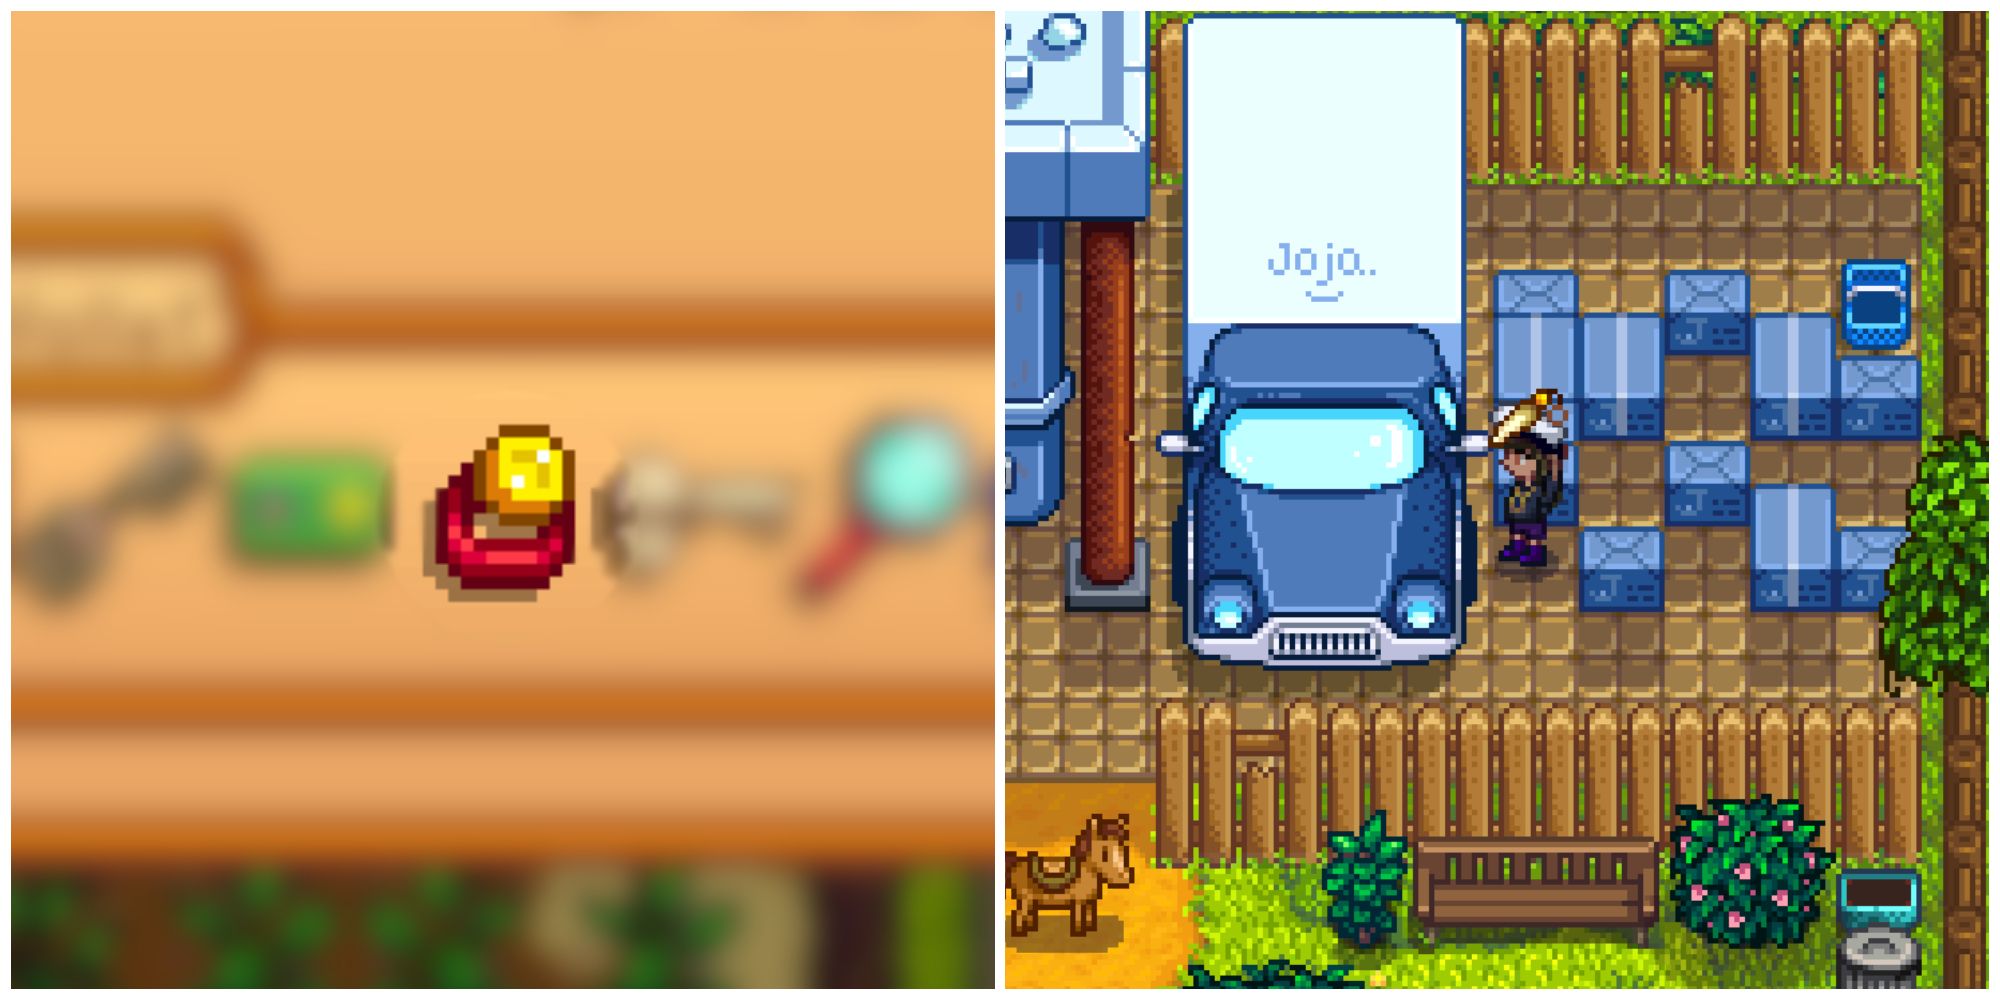 Split image of the special charm and a character approaching a car outside JojaMart in Stardew Valley.